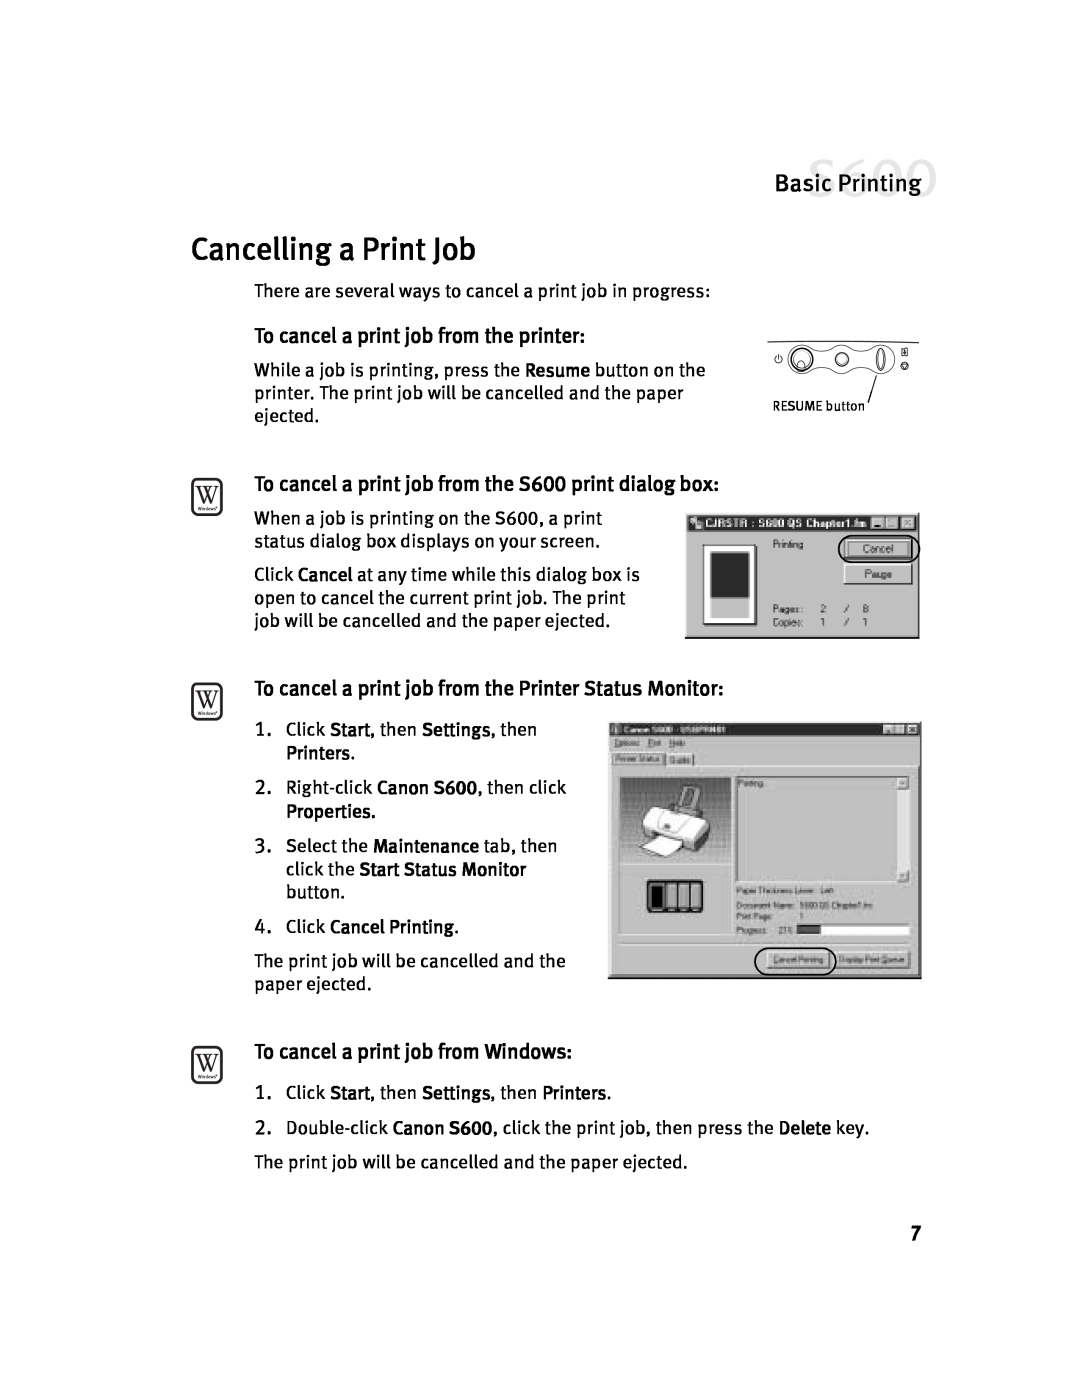 Canon S600 Cancelling a Print Job, To cancel a print job from the printer, To cancel a print job from Windows, Properties 